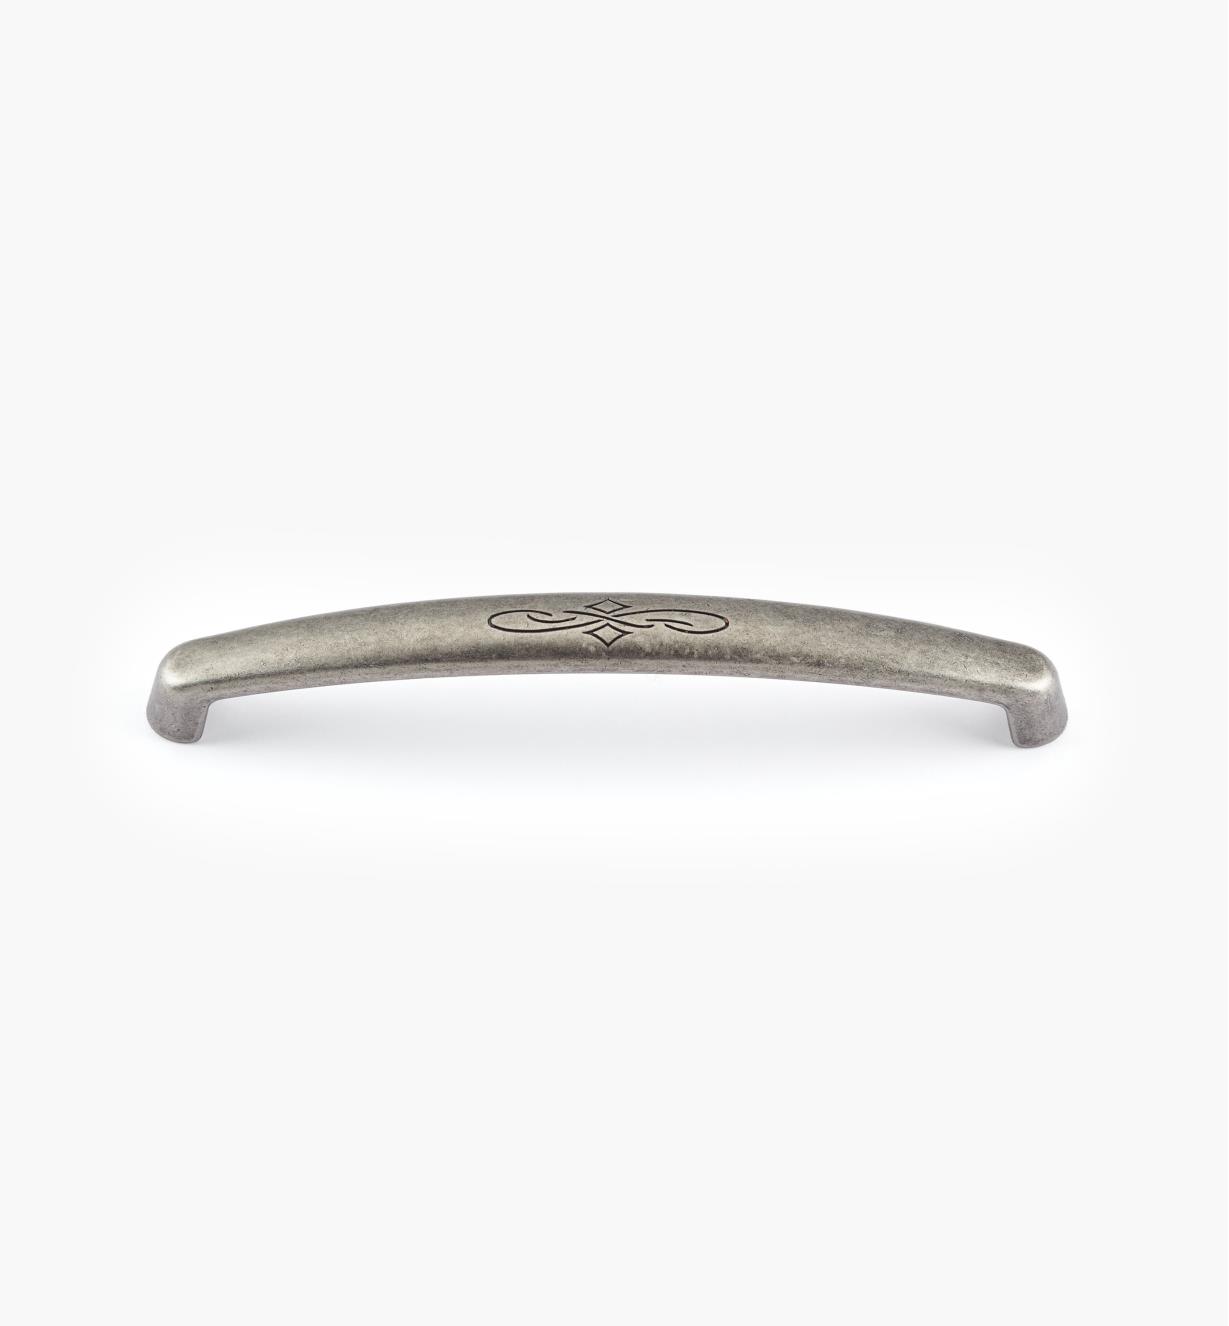 01X4109 - 128mm Detailed Pewter Handle